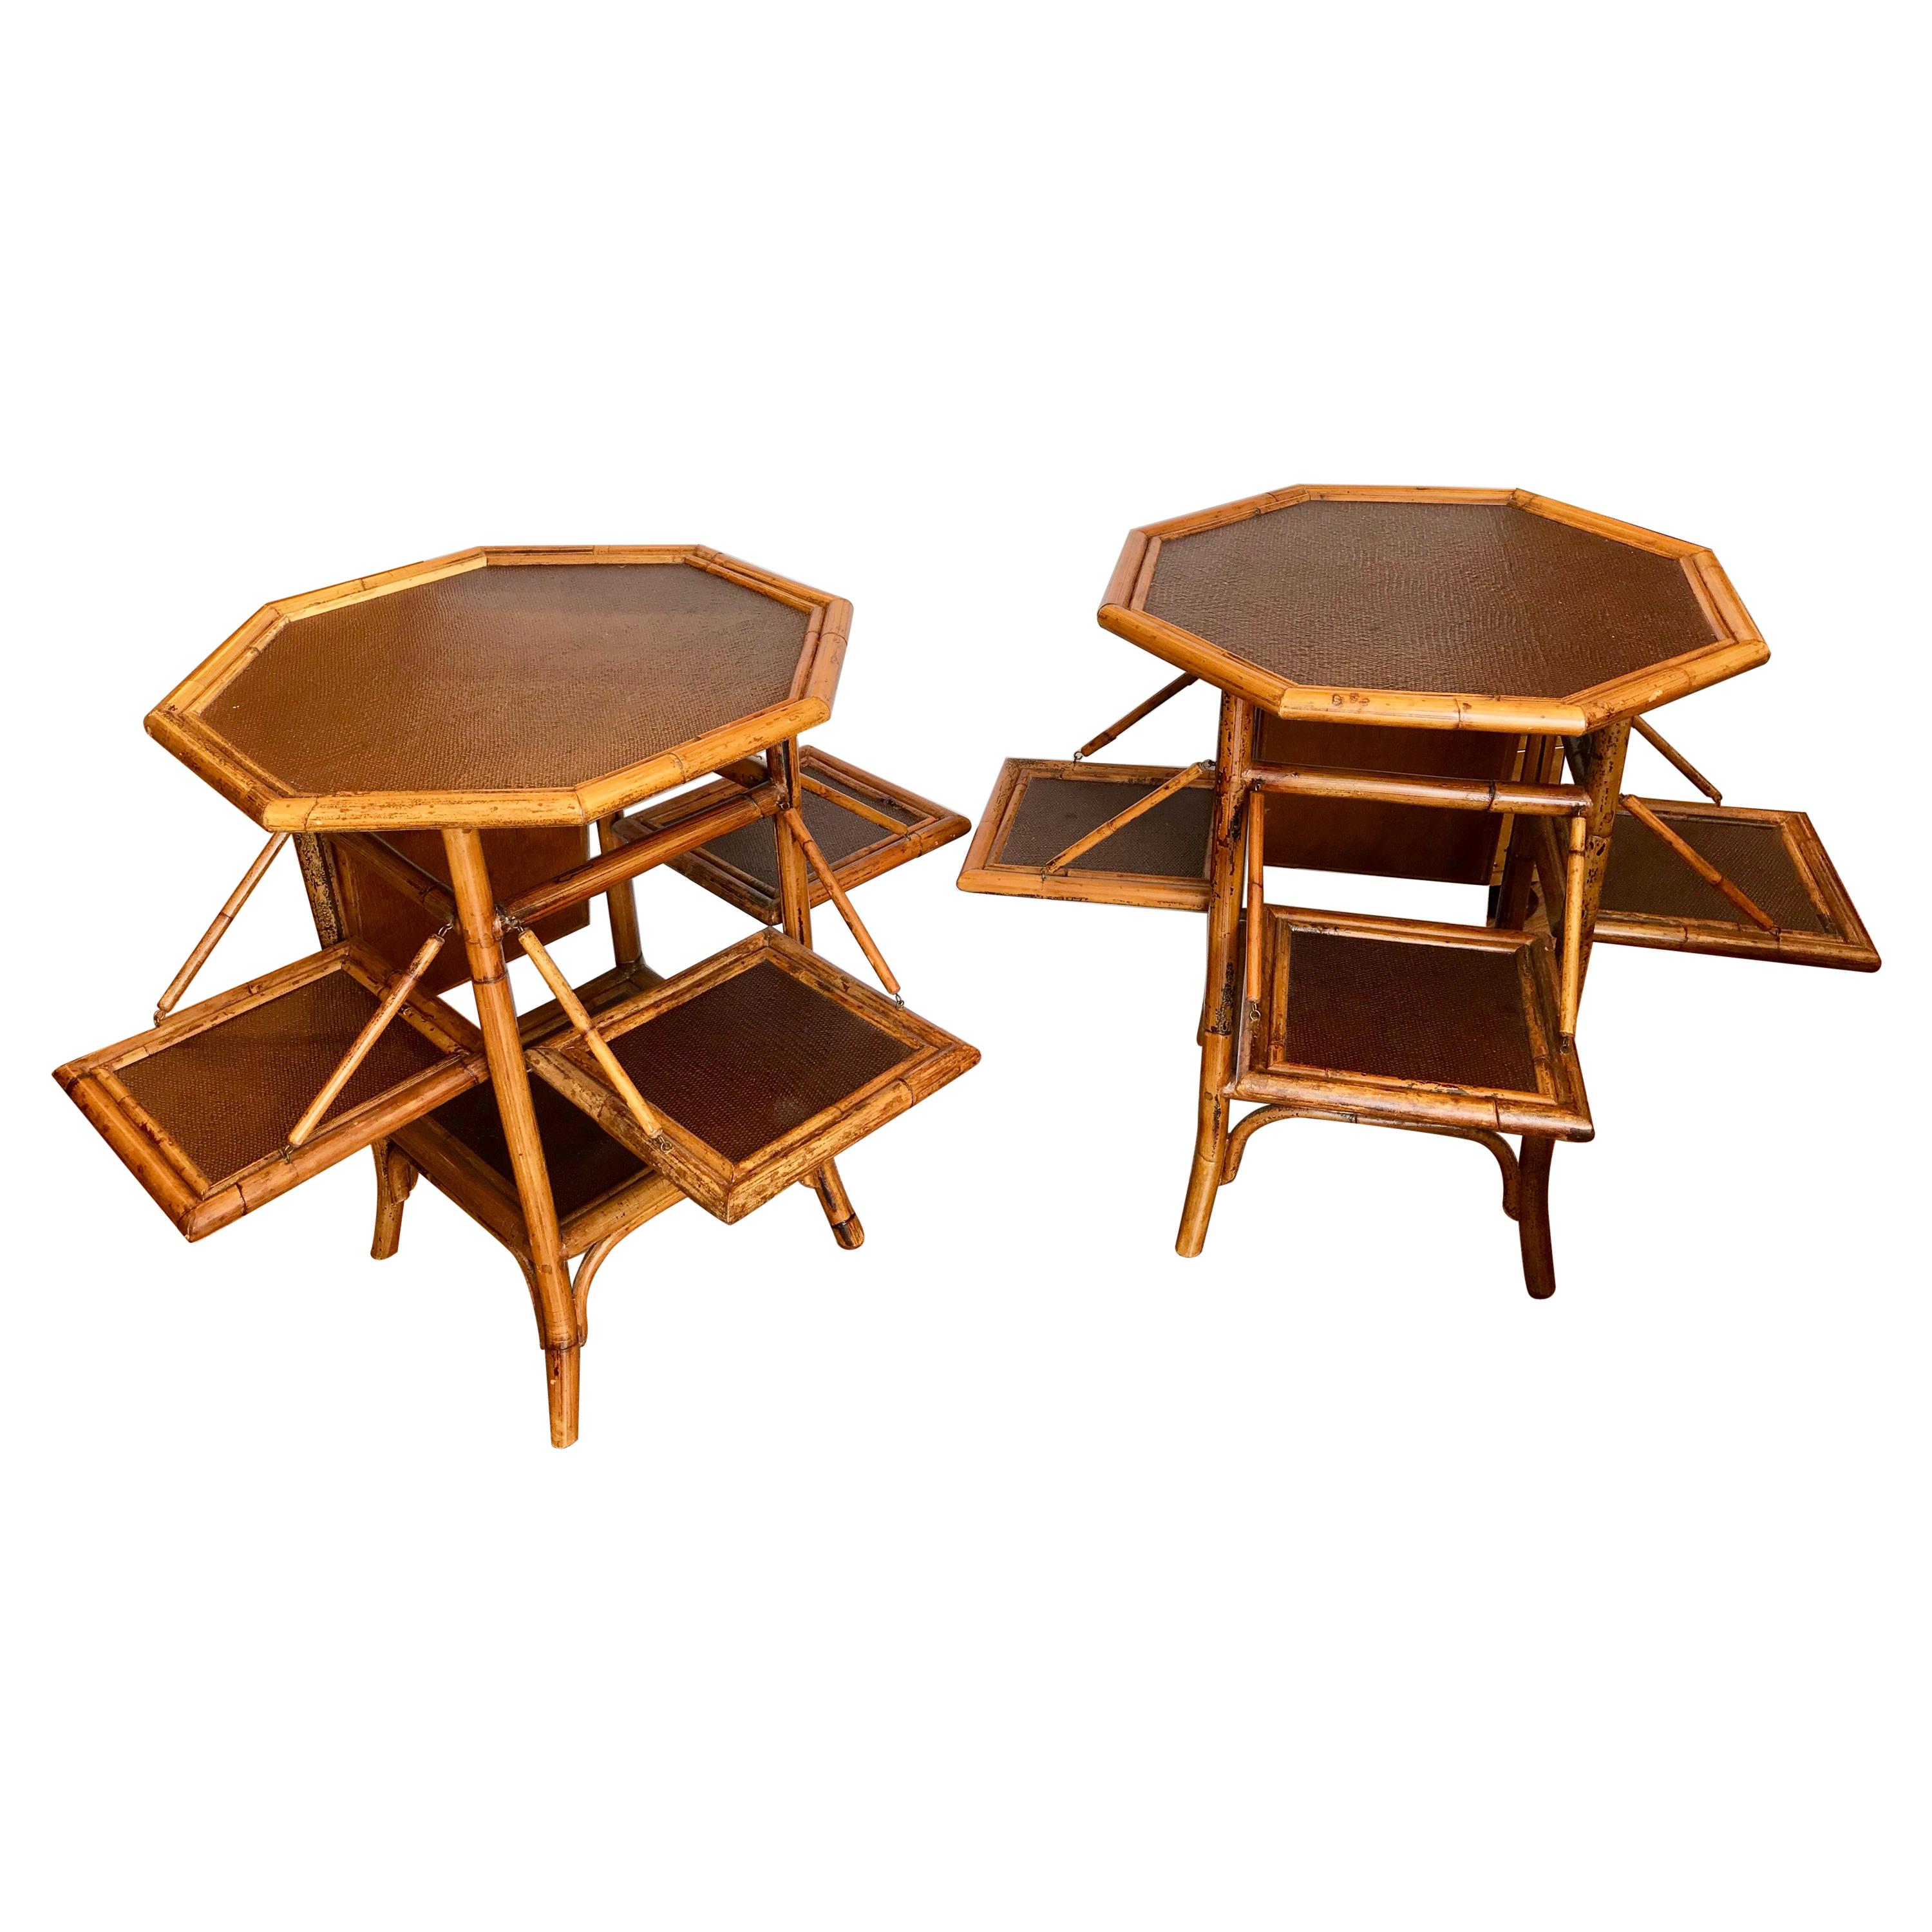 Pair of Bamboo Pastry Stand Form End Tables